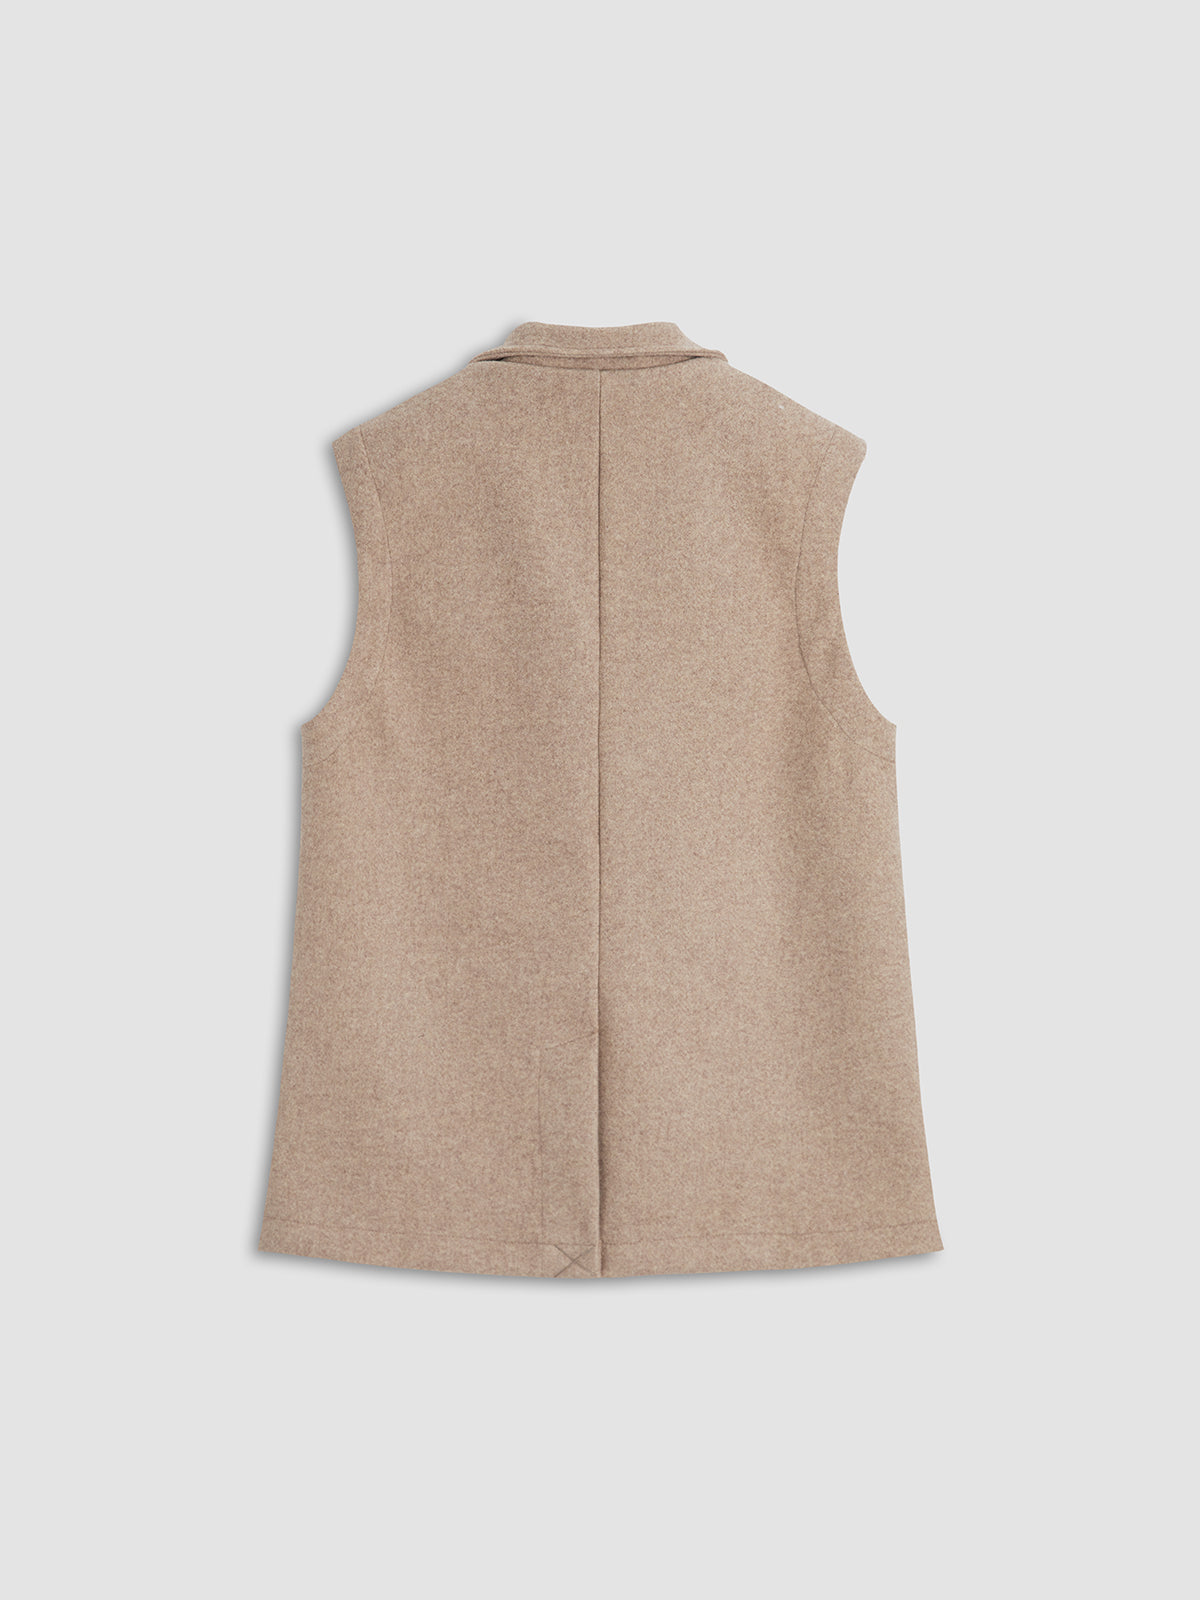 Double Pockets Collared Vest